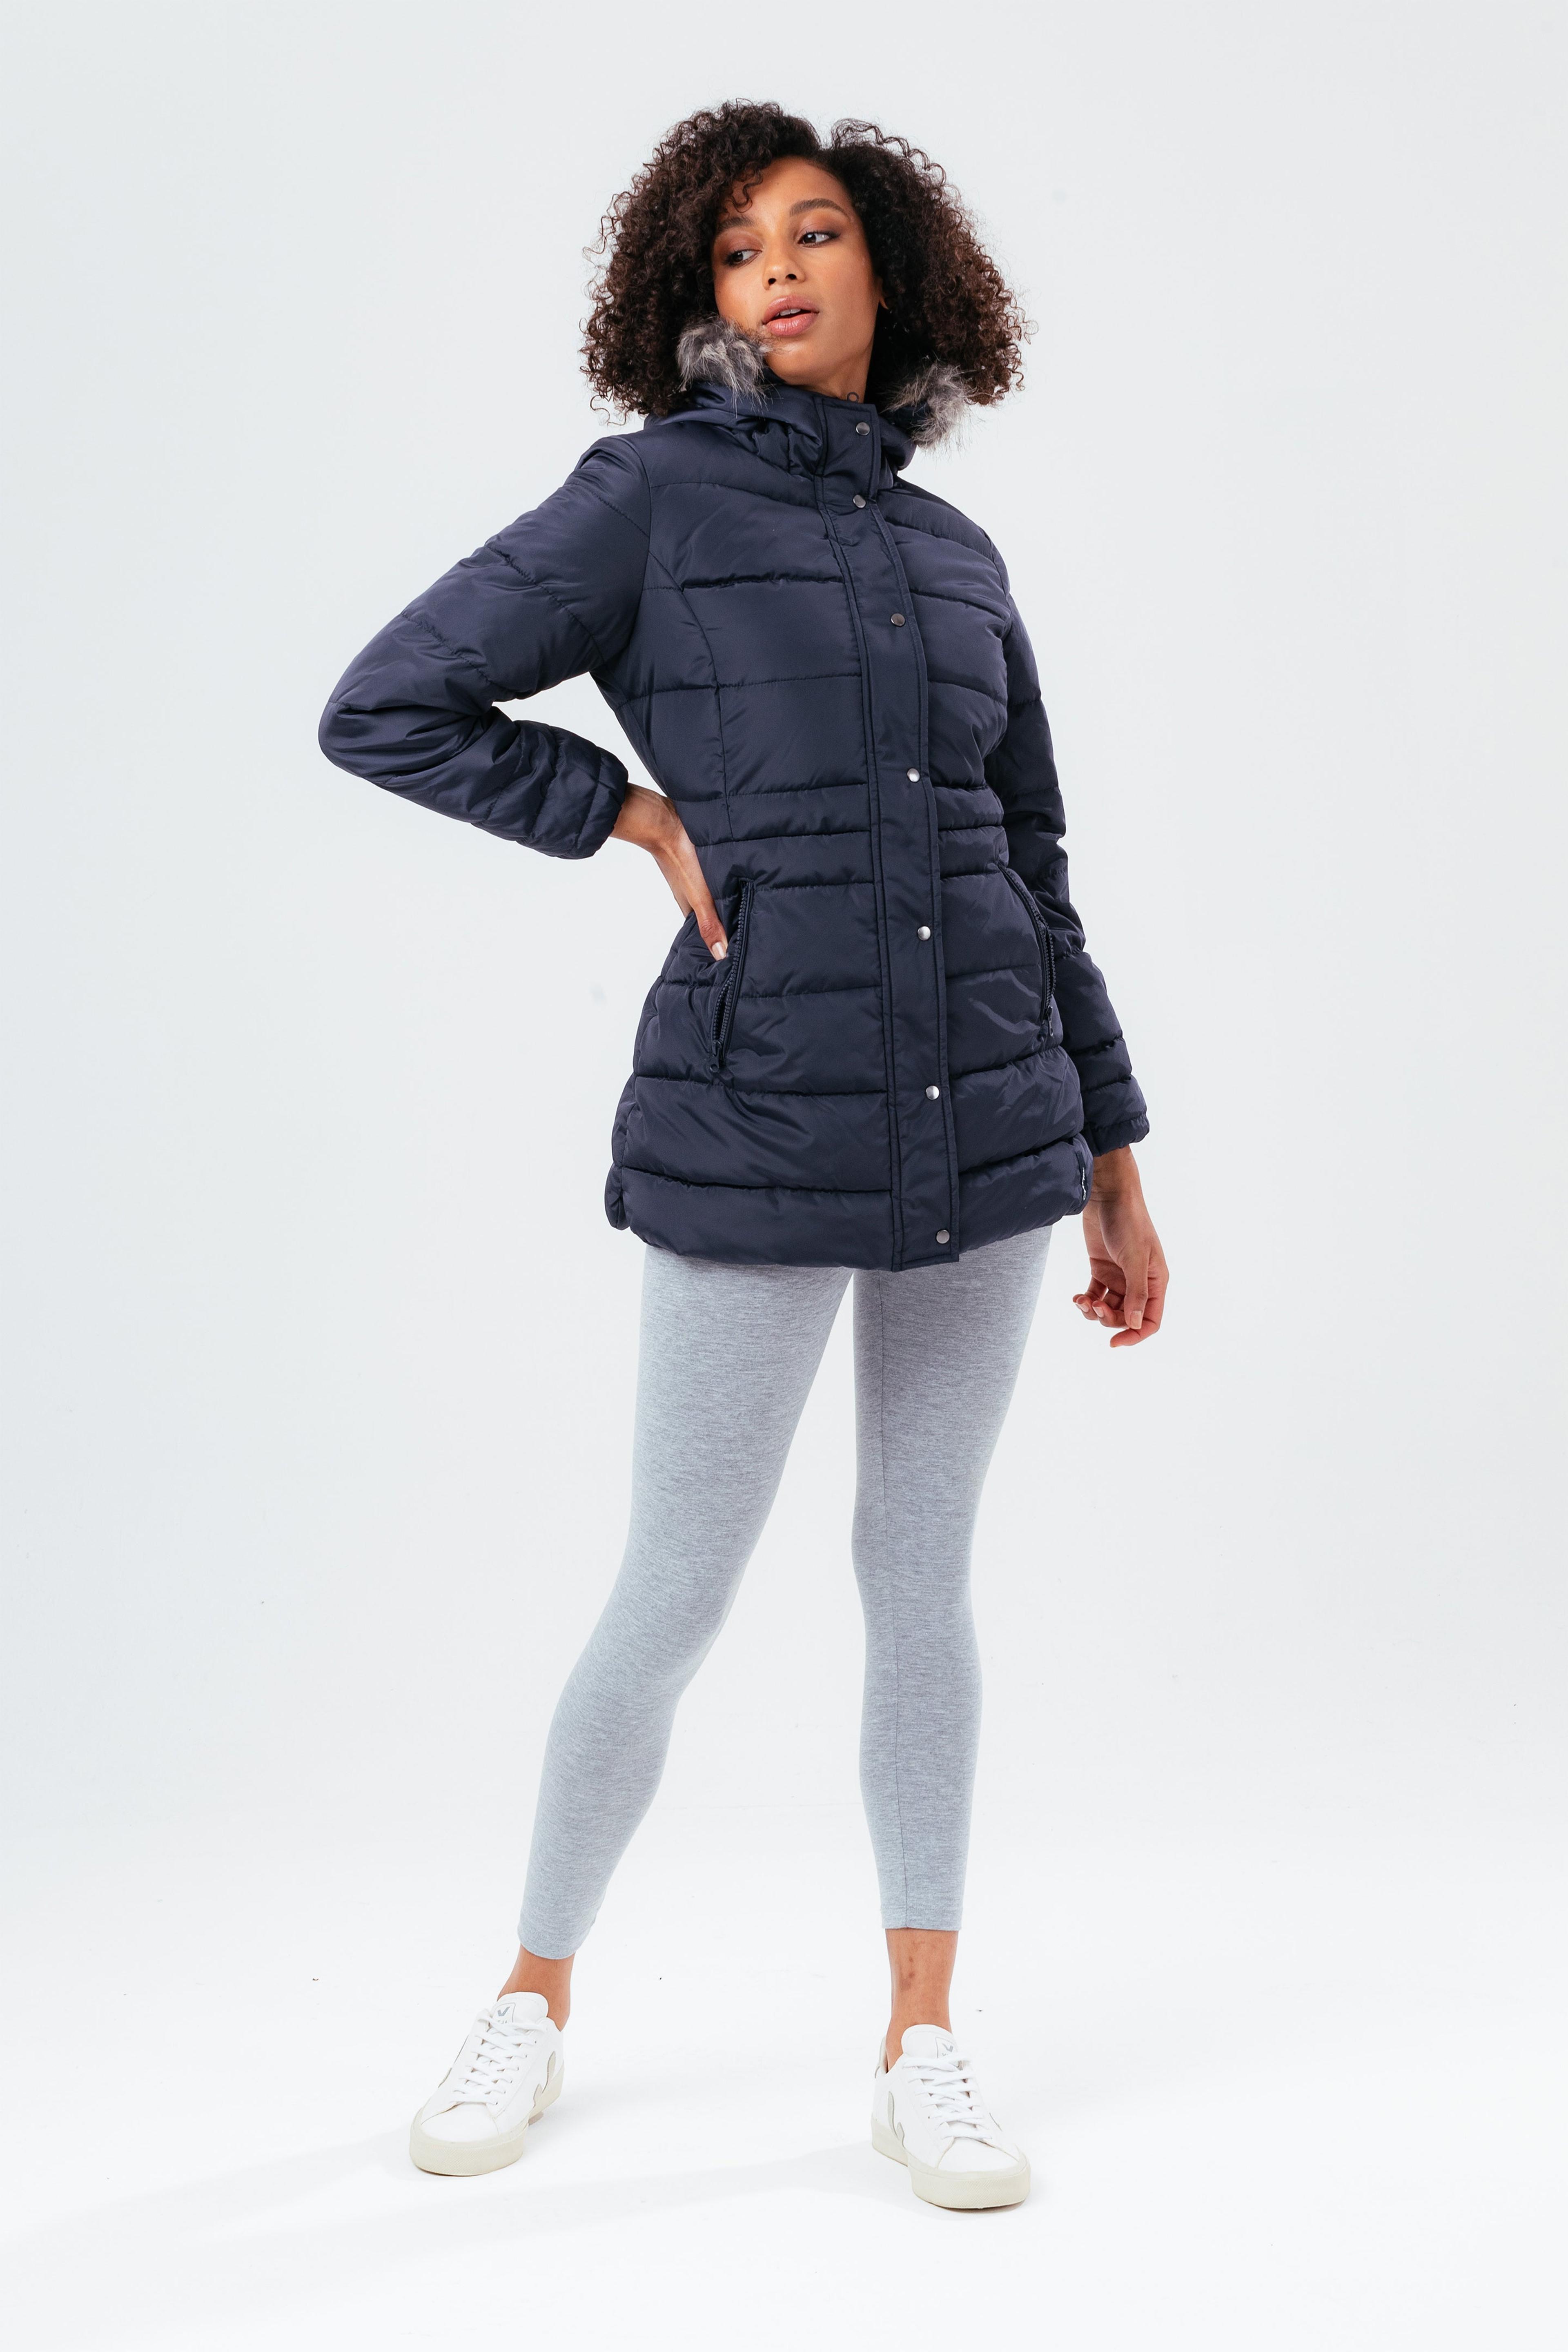 Alternate View 1 of HYPE NAVY MID LENGTH WOMEN'S PADDED COAT WITH FUR